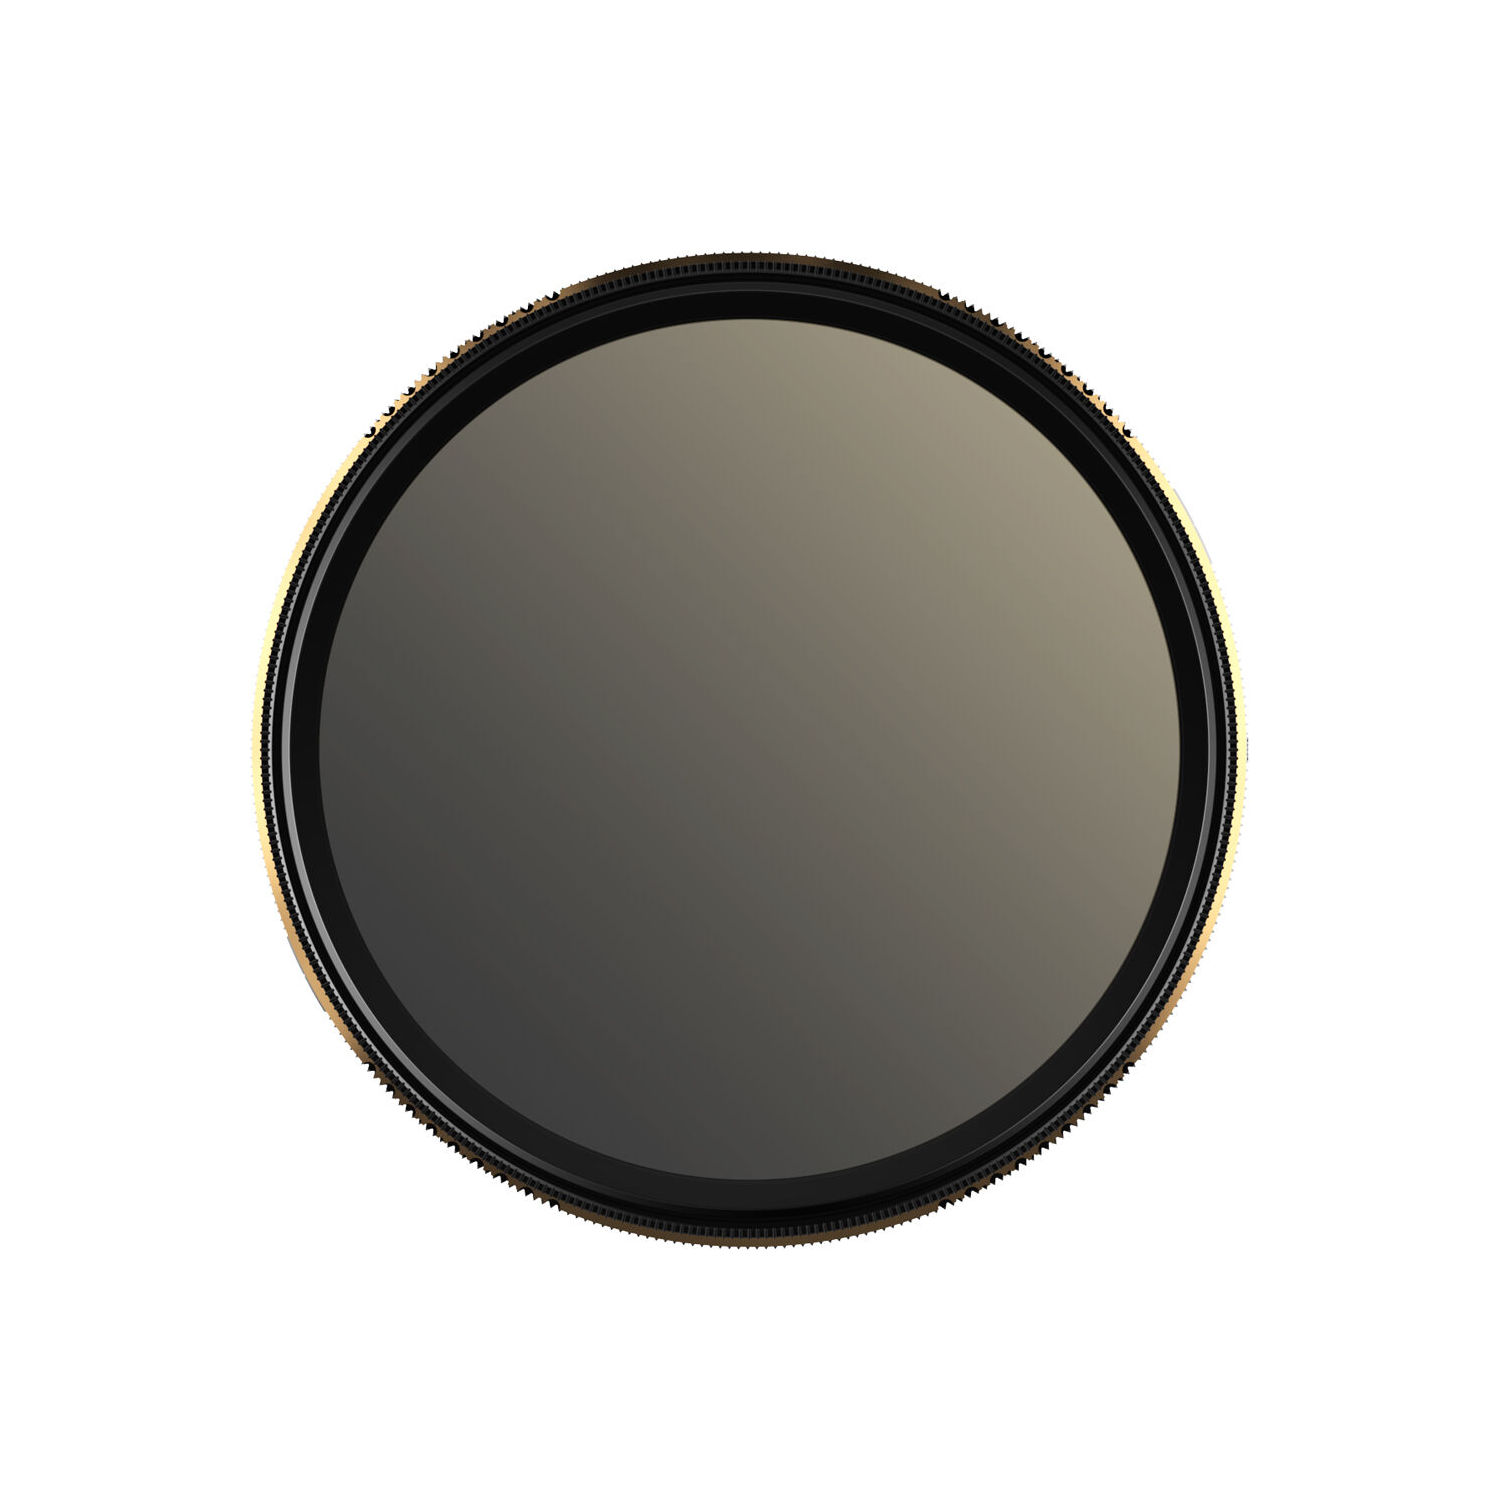 PolarPro Peter McKinnon Signature Edition II Variable ND 0.6 to 1.5 Filter - 2 to 5-Stop - 67mm